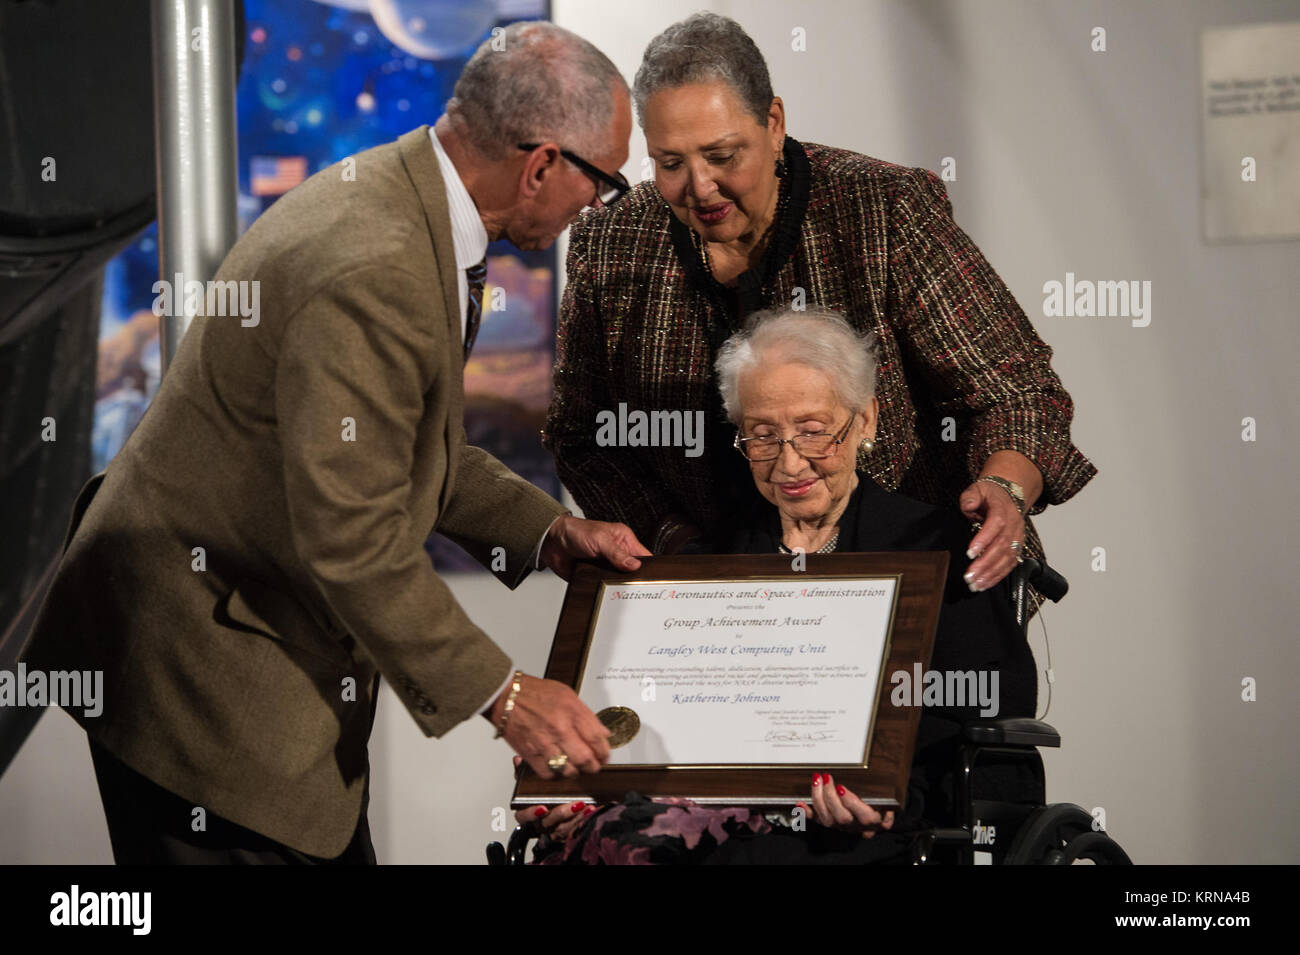 NASA Administrator Charles Bolden presents an award to Katherine Johnson, the African American mathematician, physicist, and space scientist, who calculated flight trajectories for John Glenn's first orbital flight in 1962, at a reception to honor members of the segregated West Area Computers division of Langley Research Center on Thursday, Dec. 1, 2016, at the Virginia Air and Space Center in Hampton, VA. Afterward, the guests attended a premiere of 'Hidden Figures' a film which stars Taraji P. Henson as Katherine Johnson, Octavia Spencer as Dorothy Vaughan, and Janelle Monae as Mary Jackson. Stock Photo